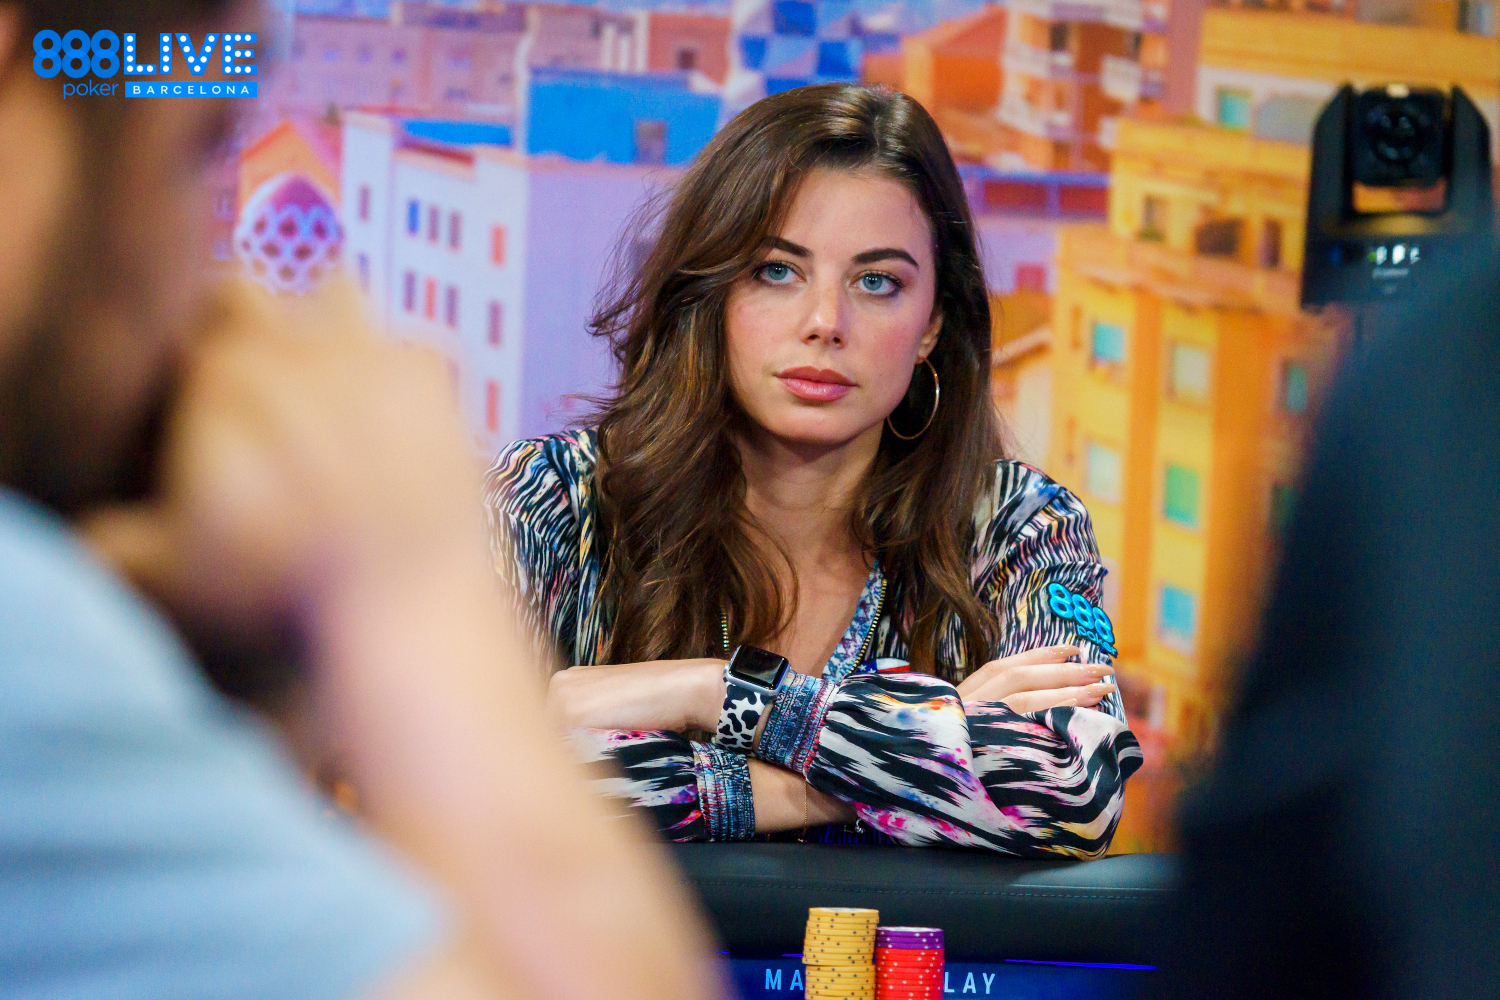 Samantha Abernathy went out in 39th place - 888pokerLIVEBCN